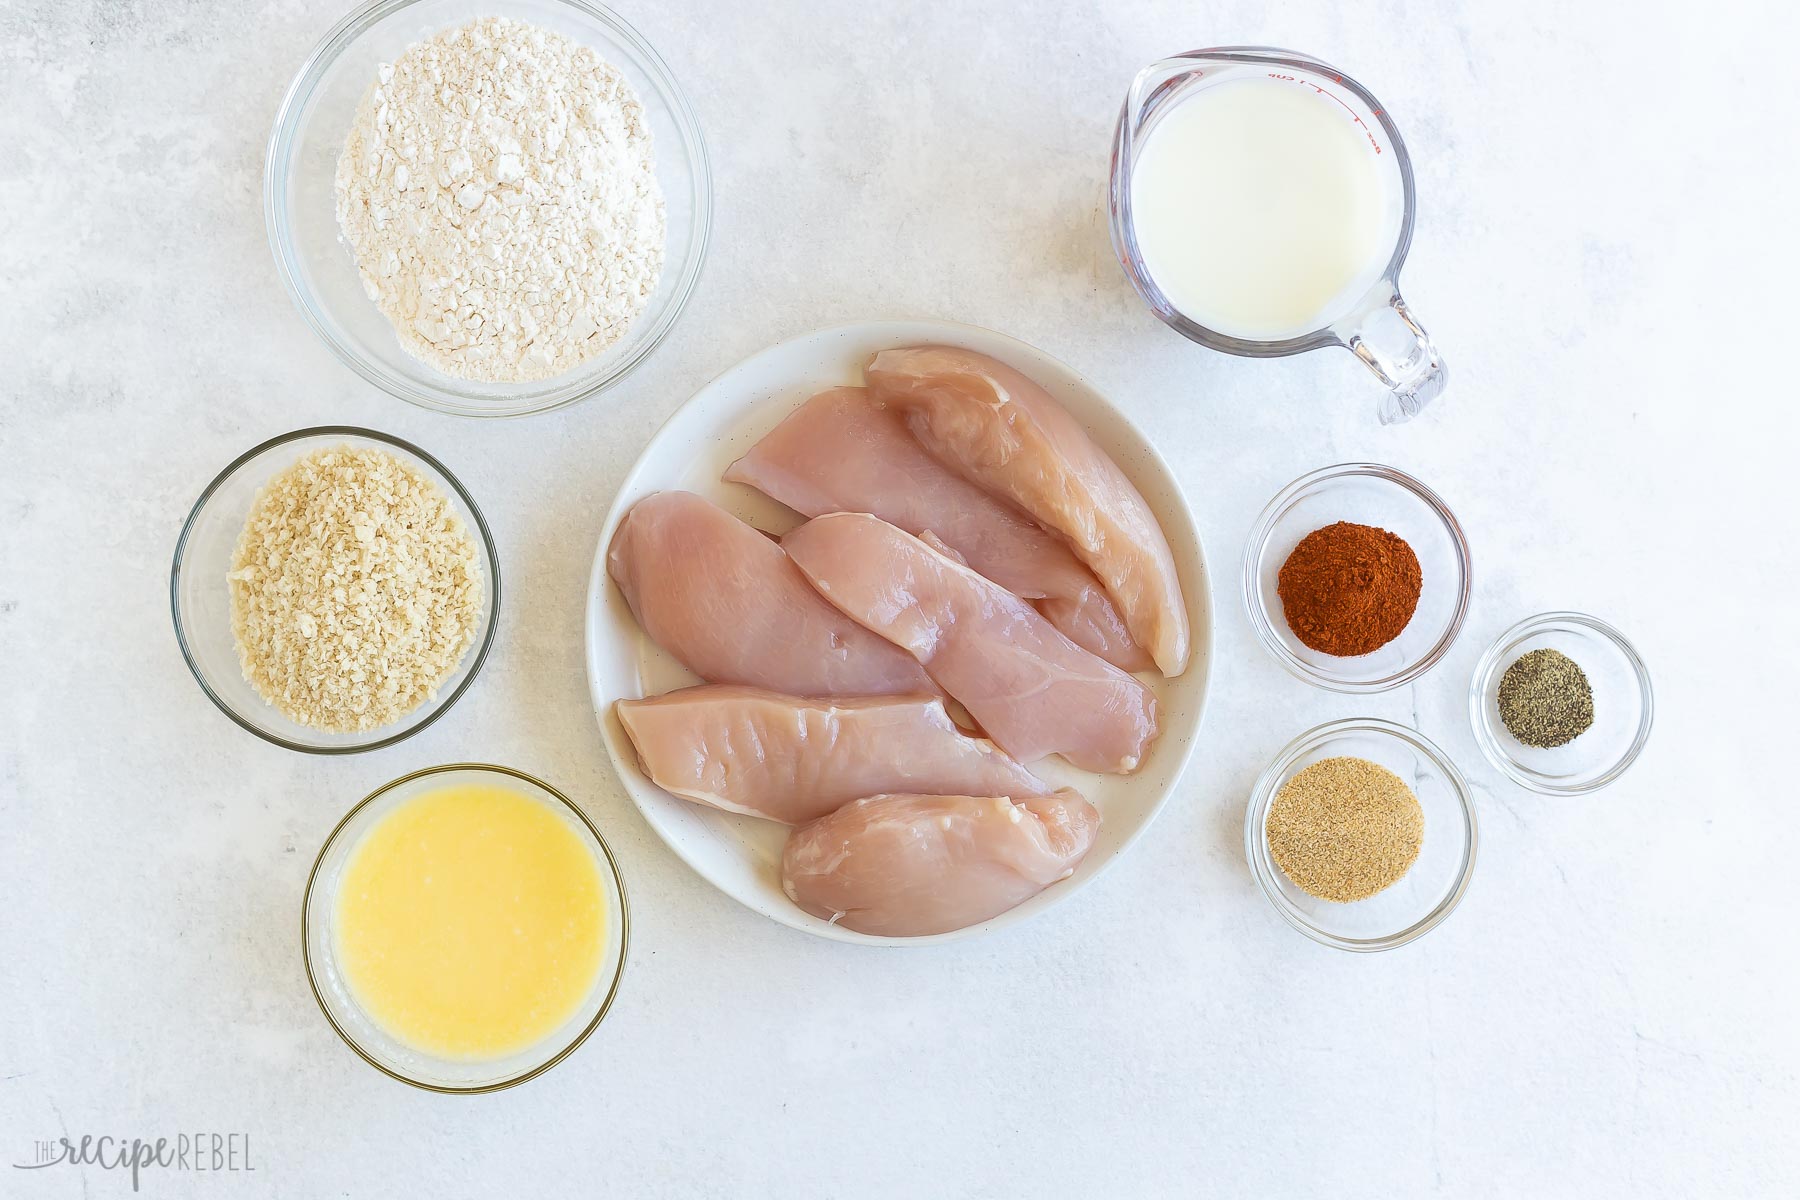 ingredients needed for baked fried chicken on white background.